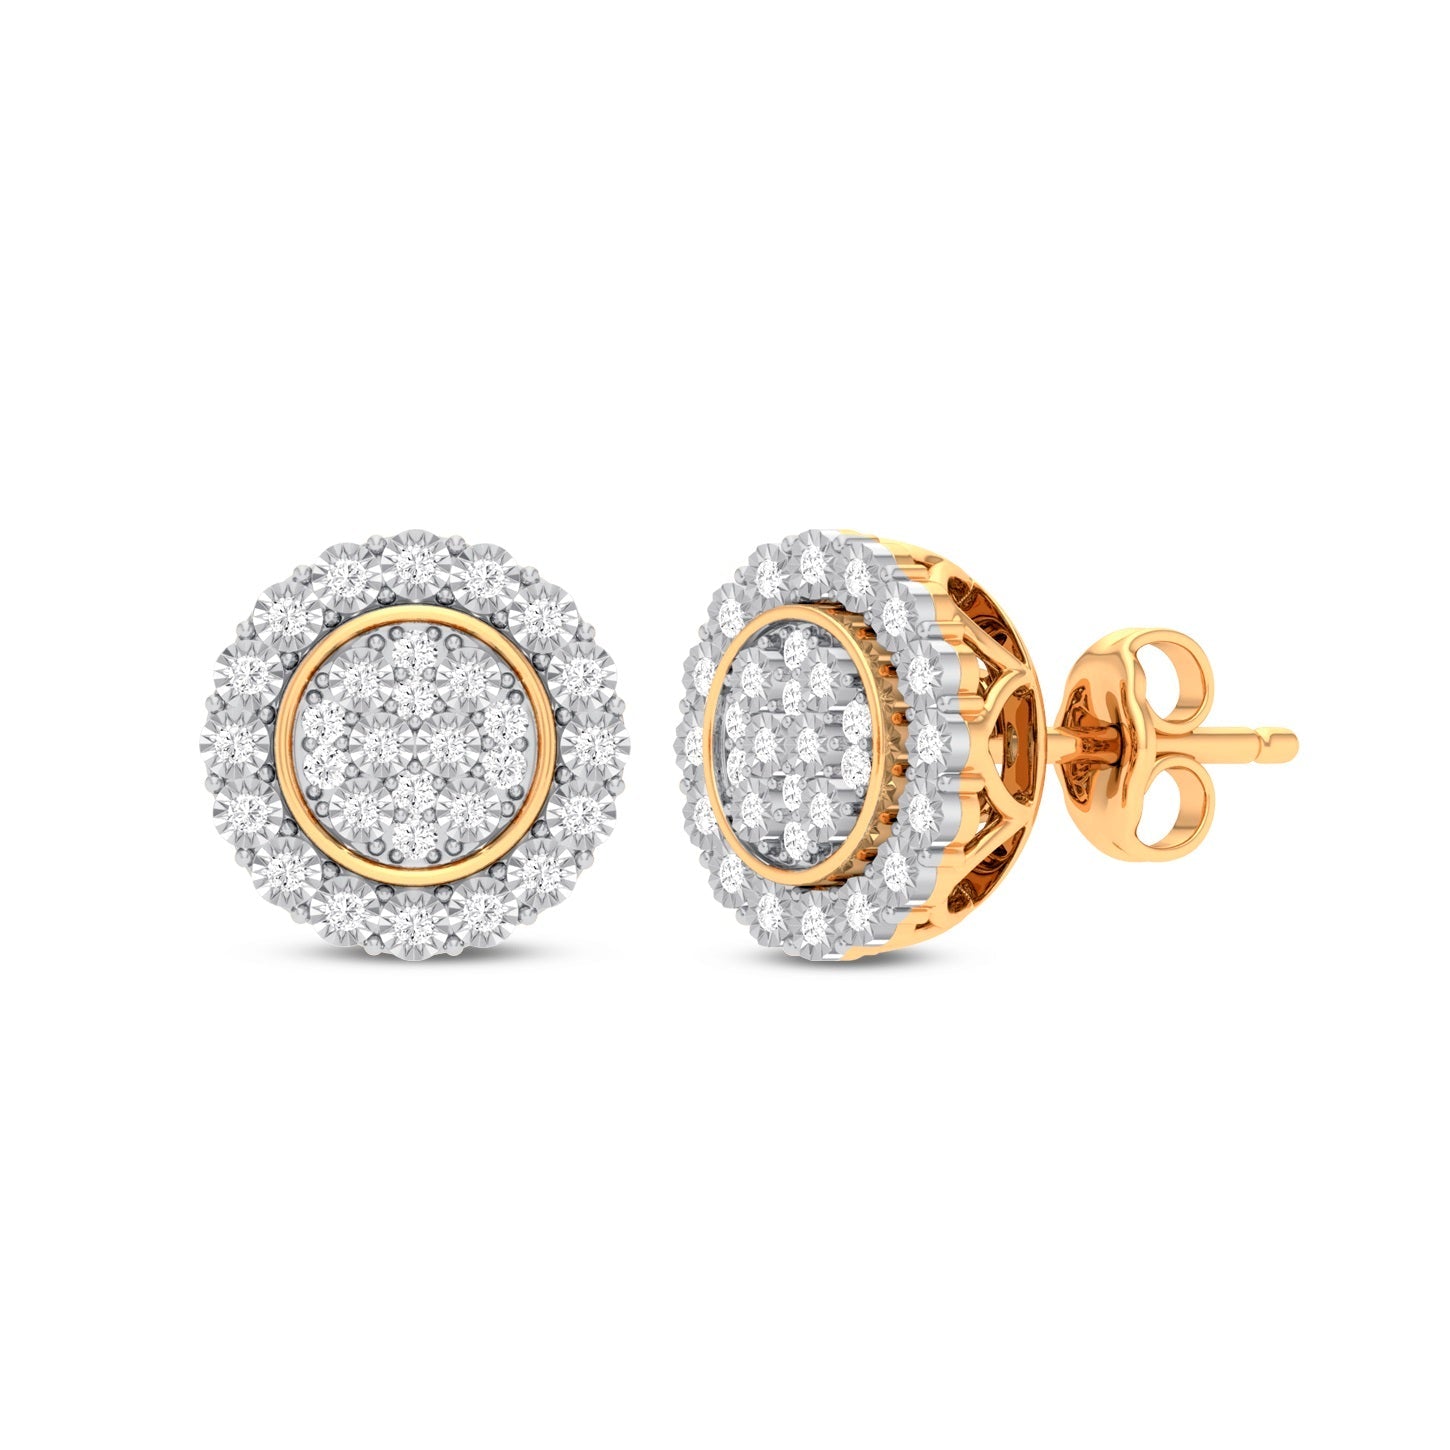 Meera Miracle Halo Earrings with 1/5ct of Laboratory Grown Diamonds in 9ct Yellow Gold Earrings Bevilles 